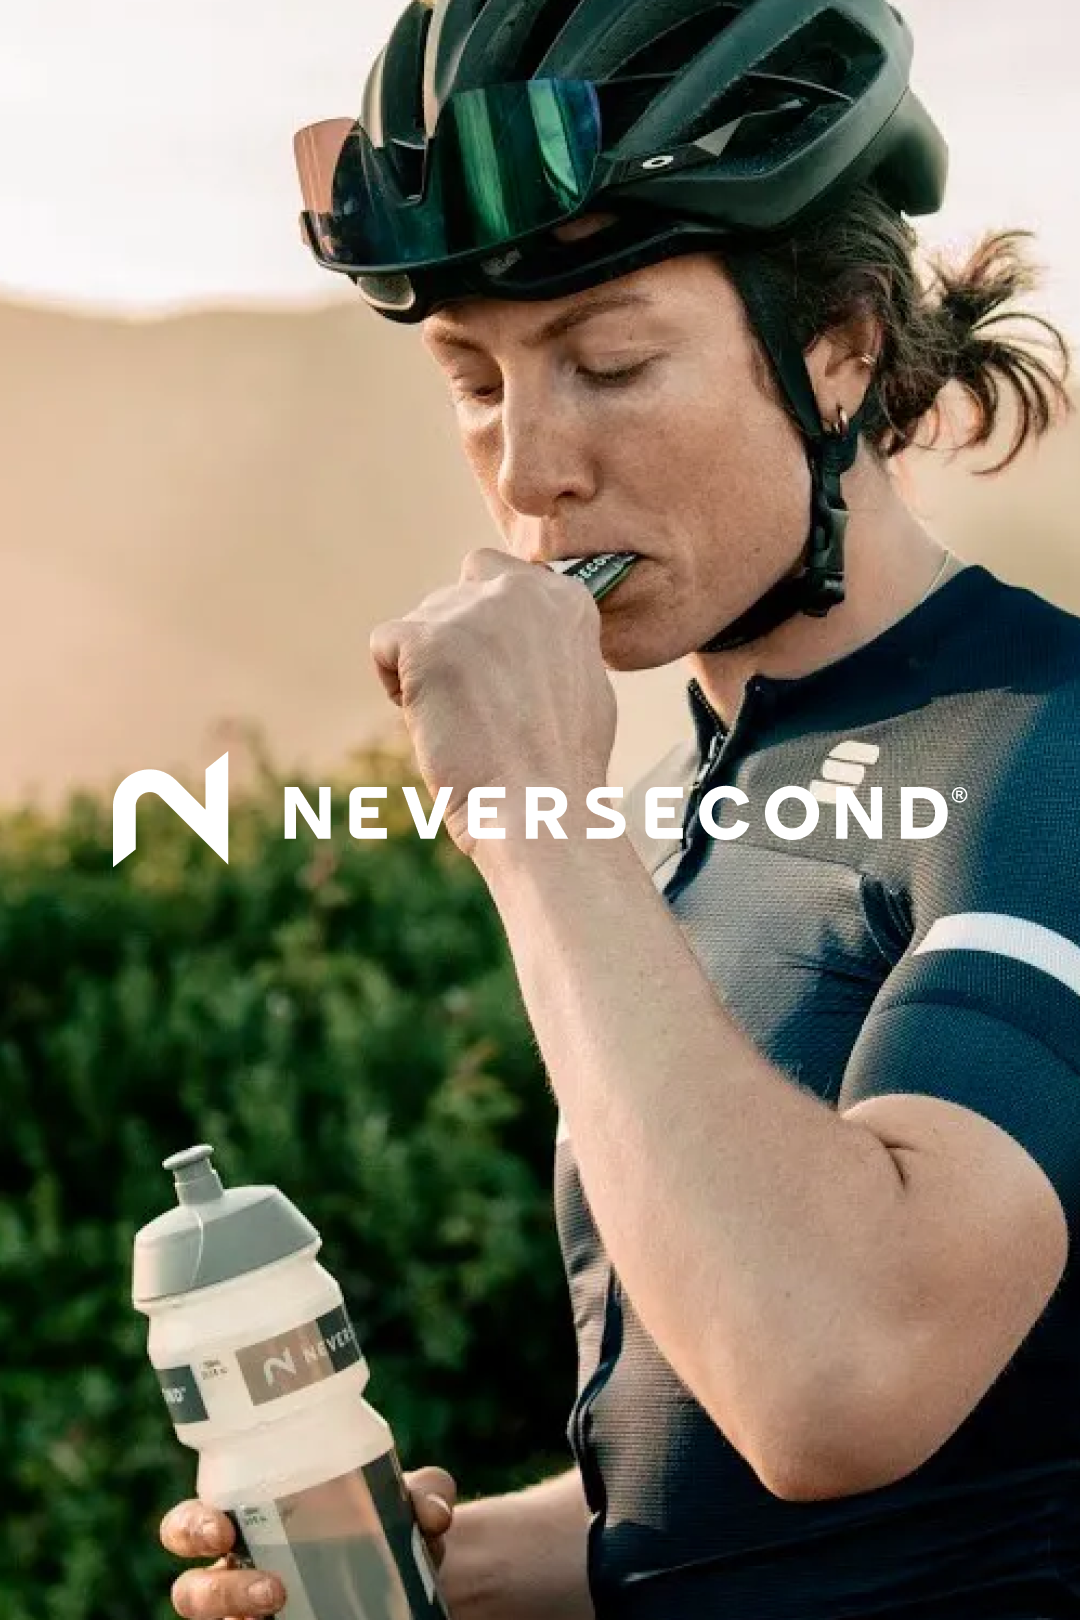 Determined cyclist in a helmet and sunglasses refueling with NEVERSECOND nutrition on a sunny day @ Bici.